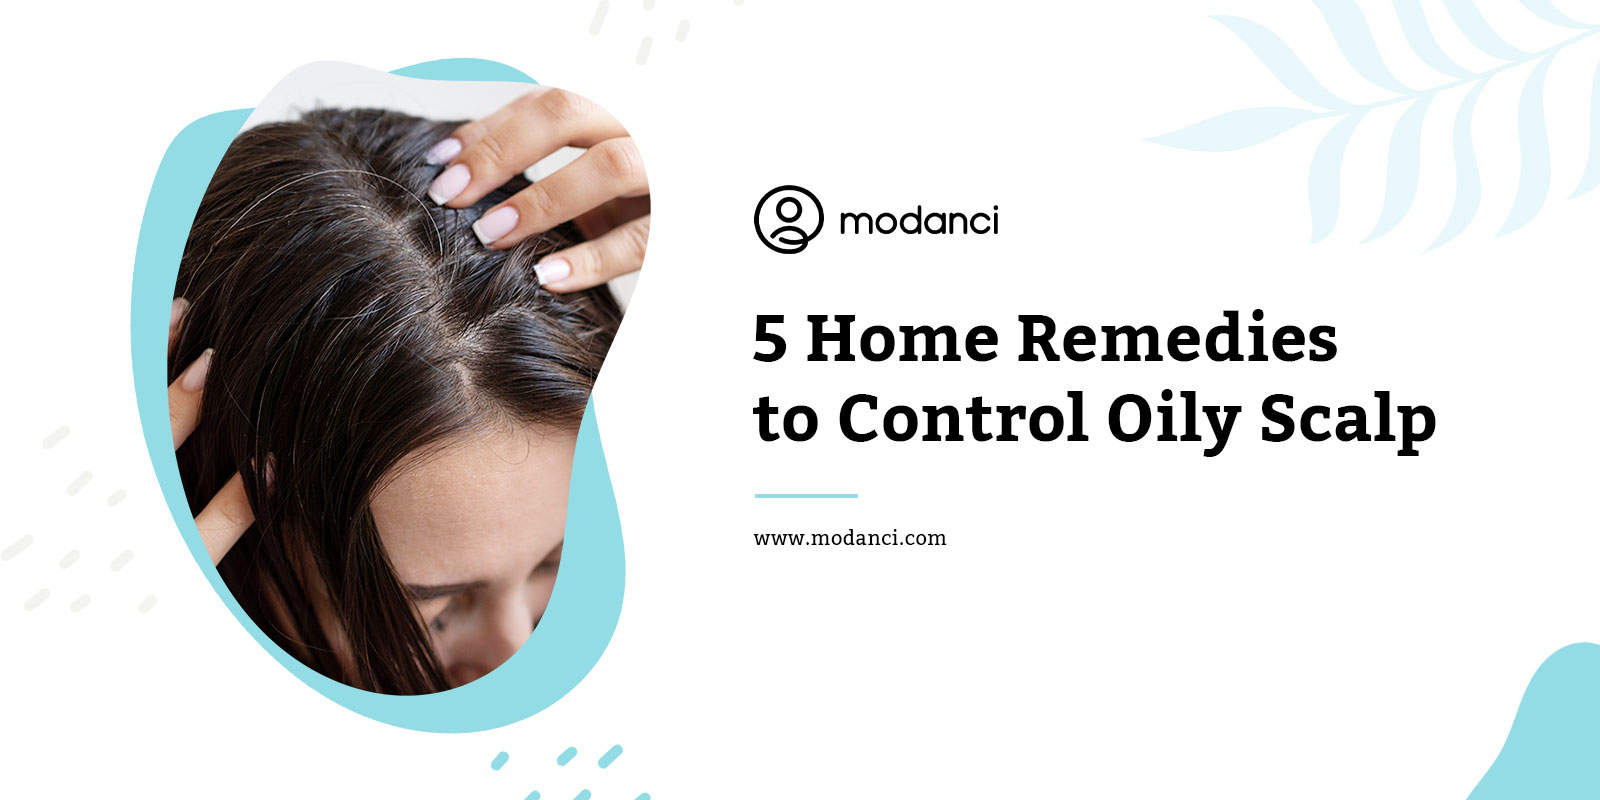 home remedies for oily scalp